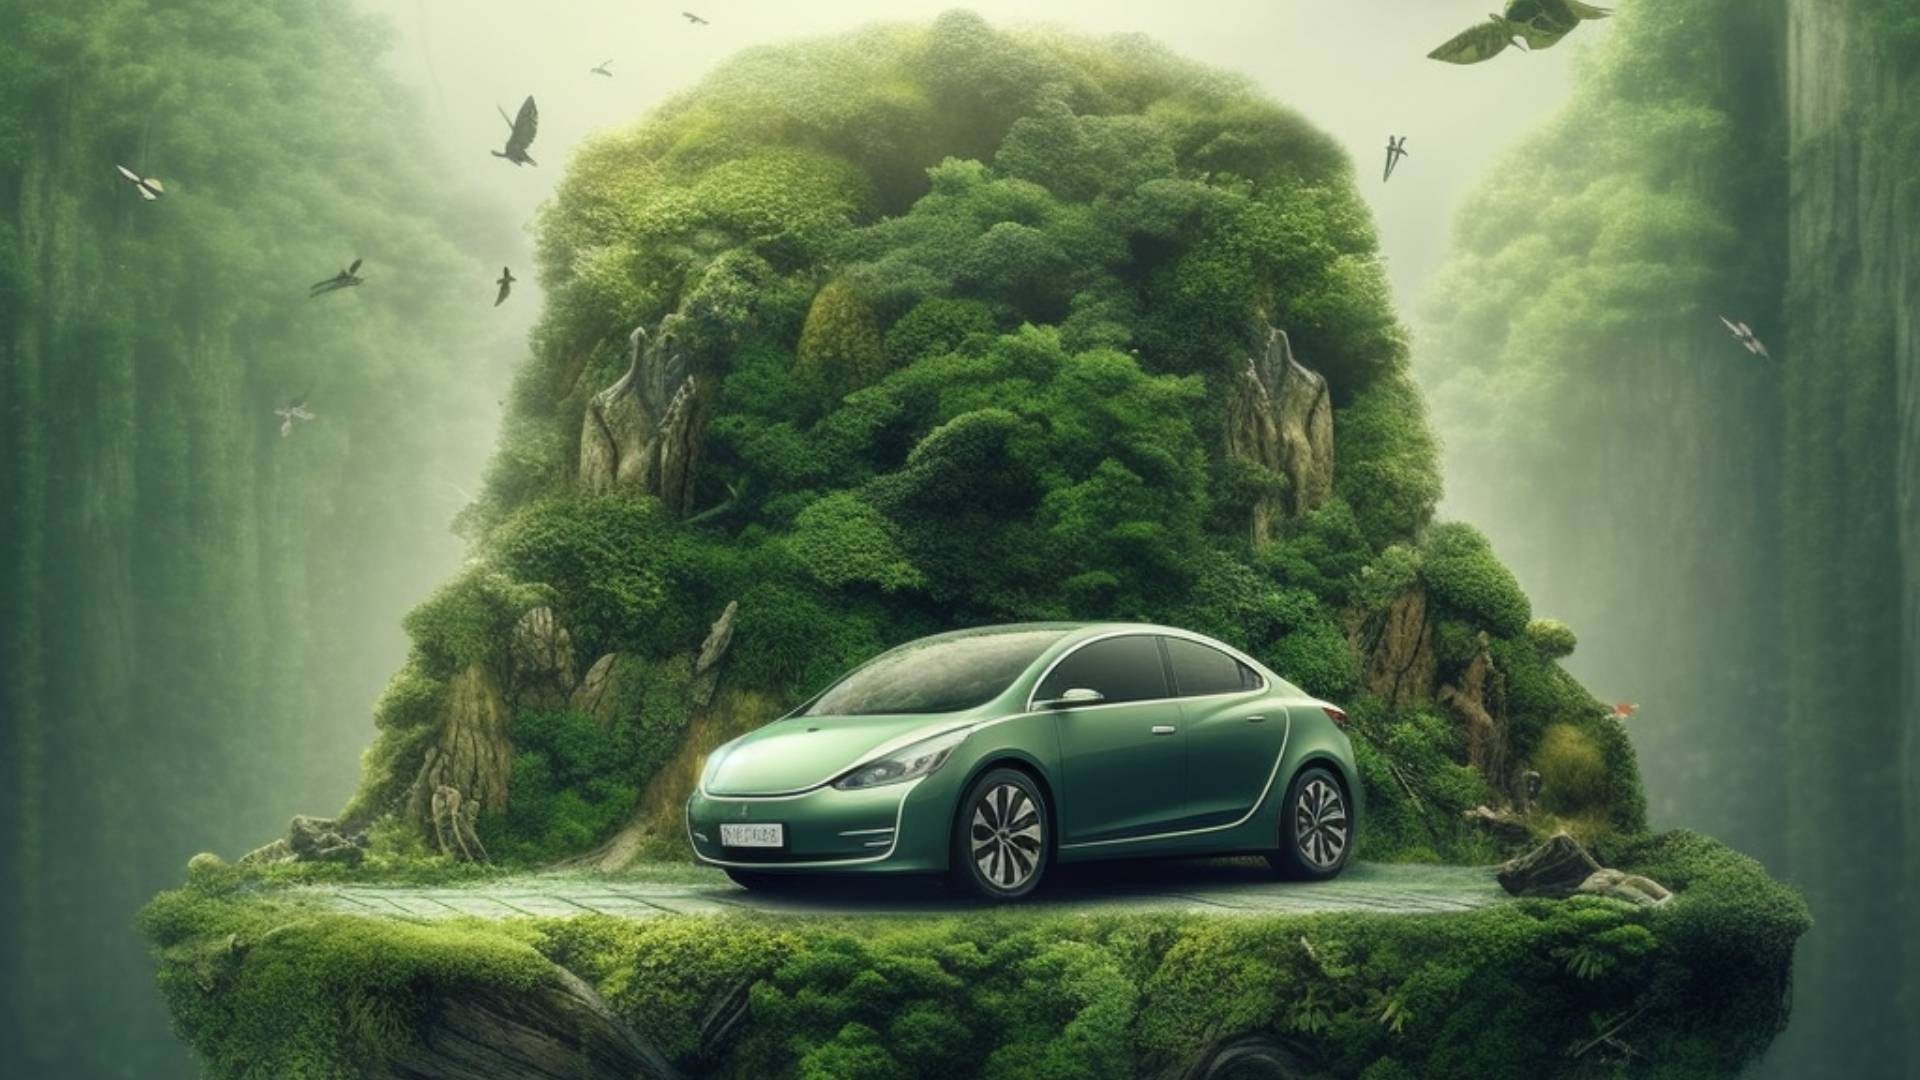 The Environmental Perks of Going Electric